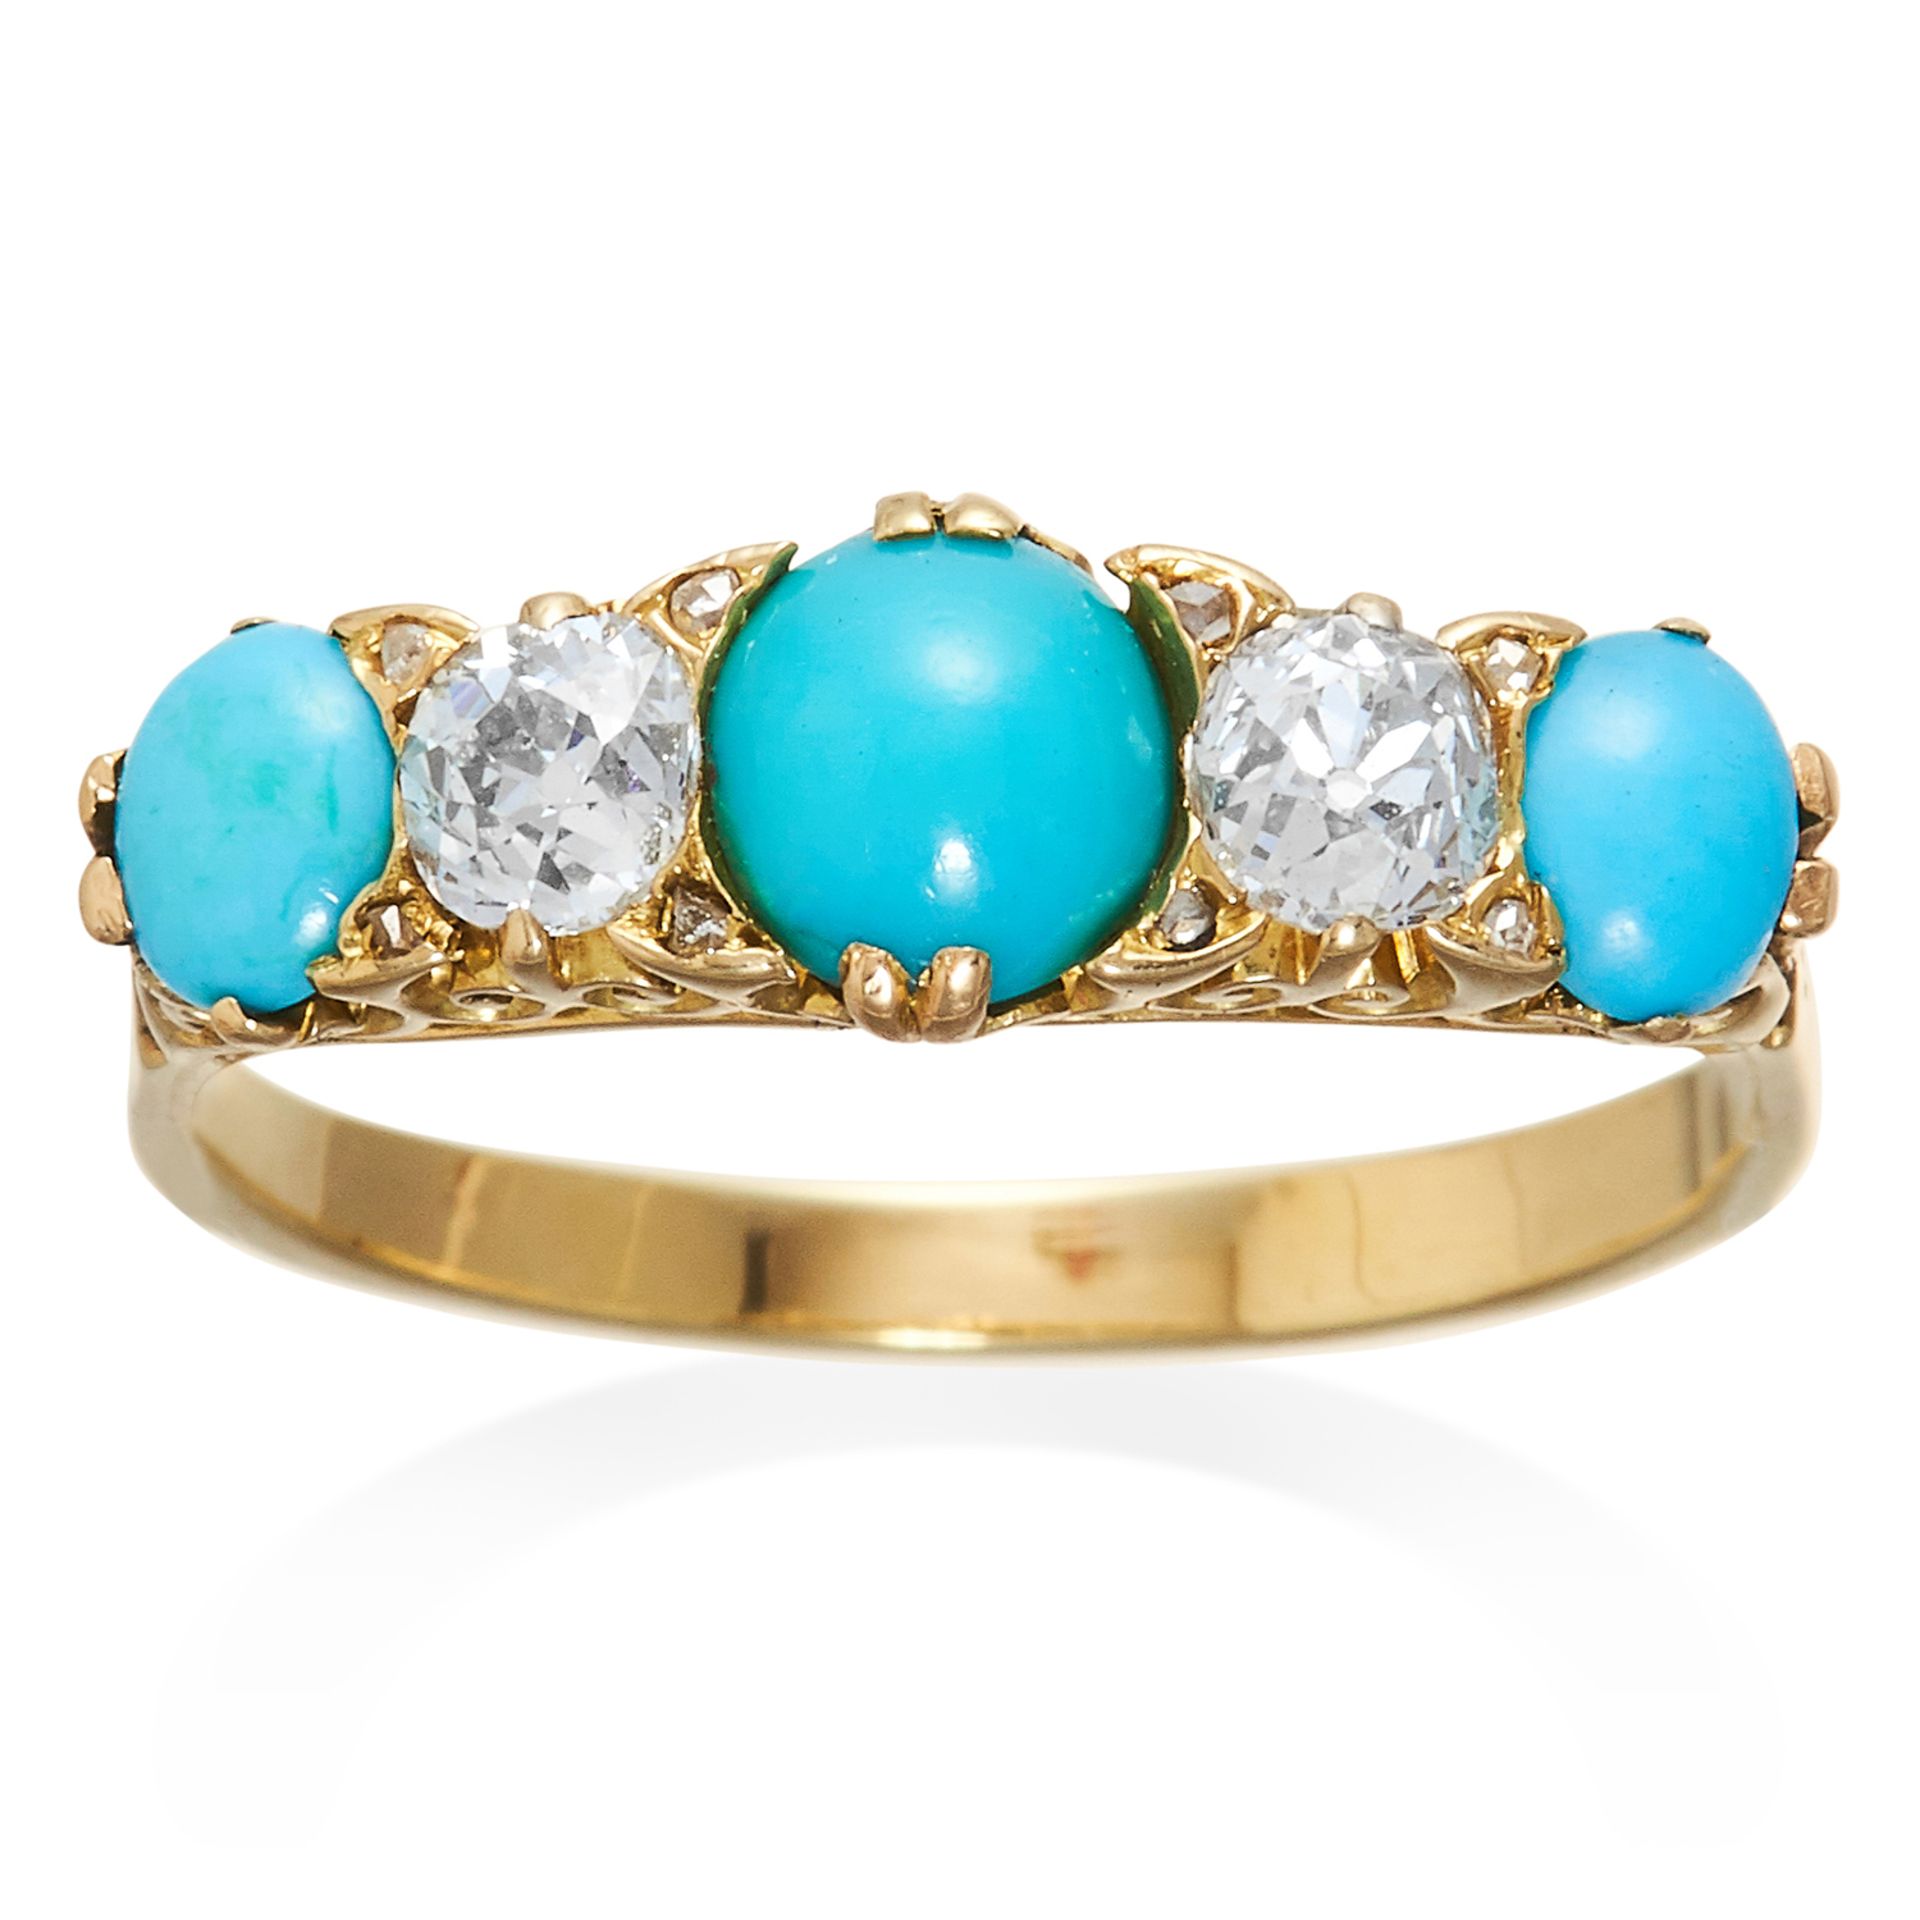 AN ANTIQUE FIVE STONE TURQUOISE AND DIAMOND RING in high carat yellow gold, set with three